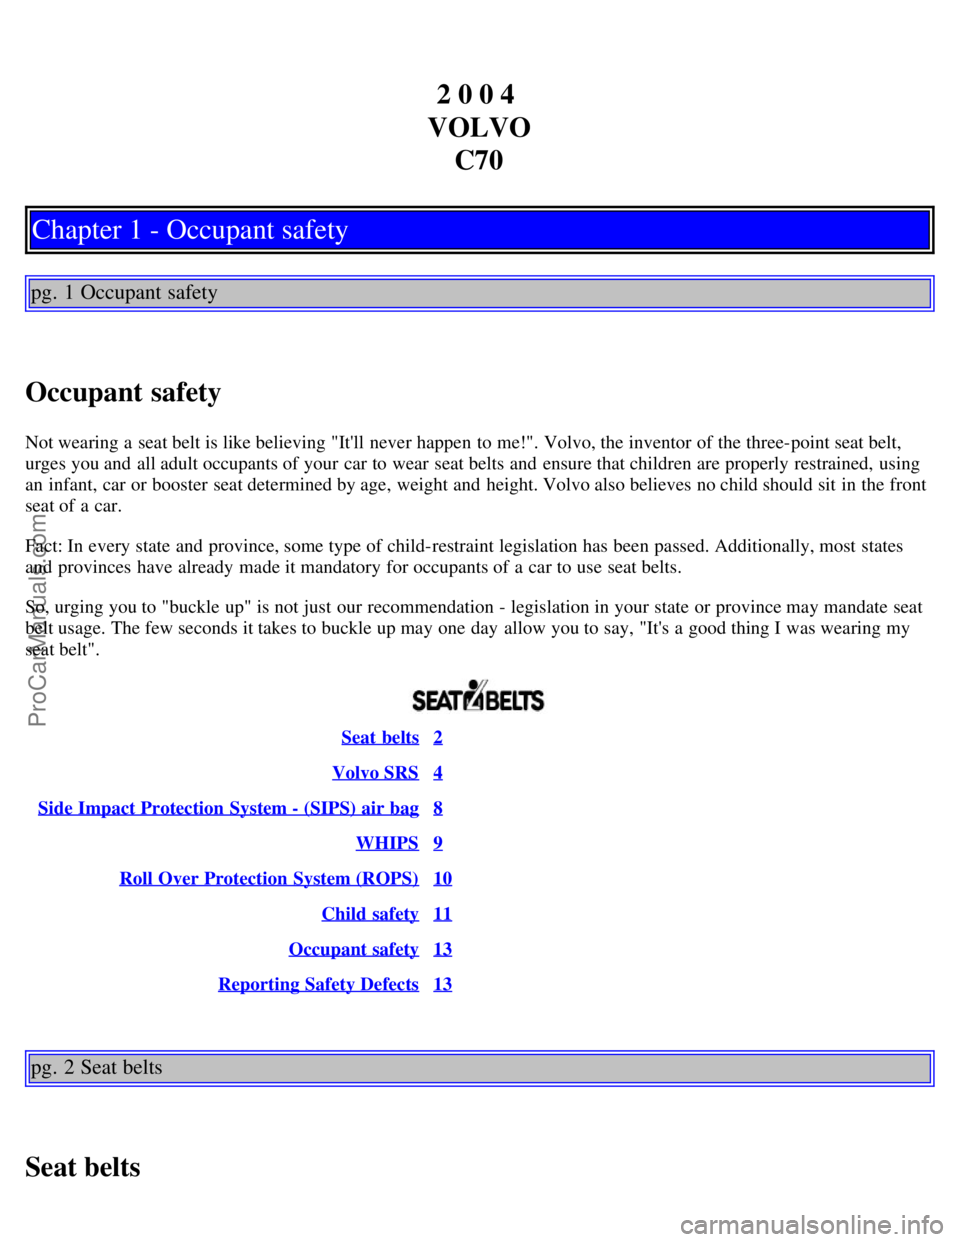 VOLVO C70 2004  Owners Manual 2 0 0 4 
VOLVO C70
Chapter 1 - Occupant safety
pg. 1 Occupant safety
Occupant safety
Not wearing a  seat belt is like believing "Itll  never happen to me!". Volvo, the inventor of the three-point sea